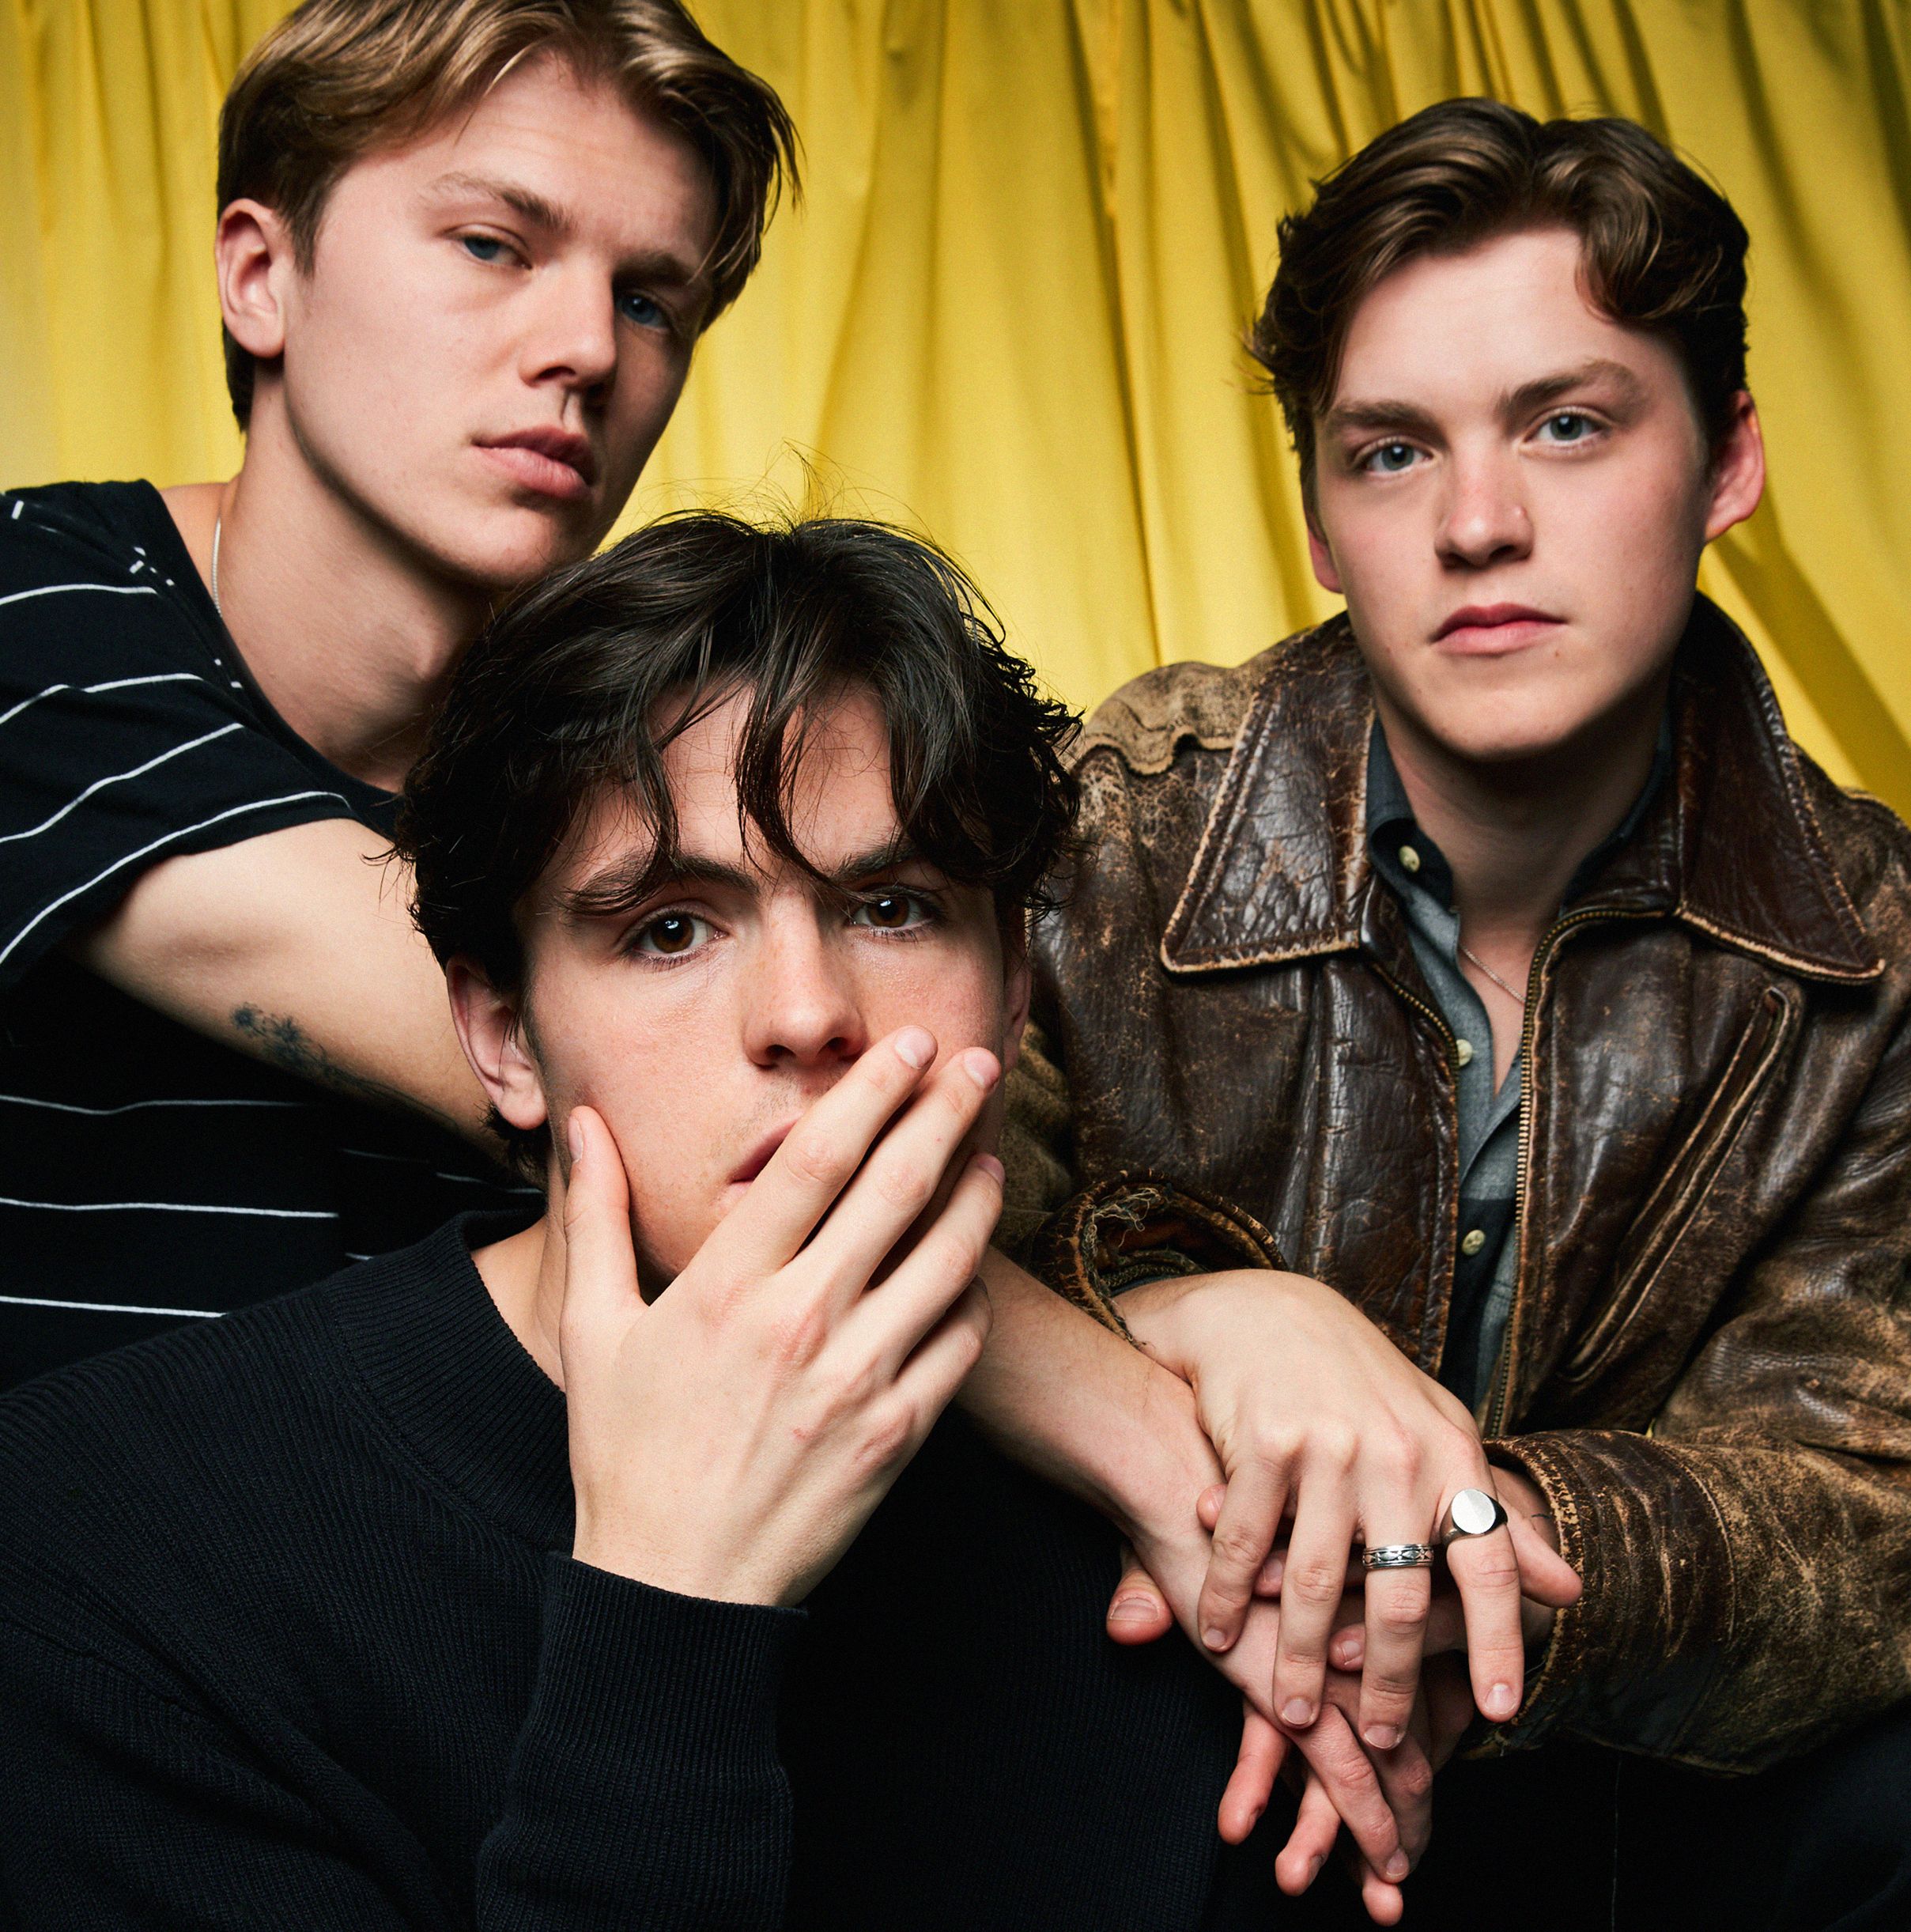 New Hope Club are back, and this time it's on their own terms